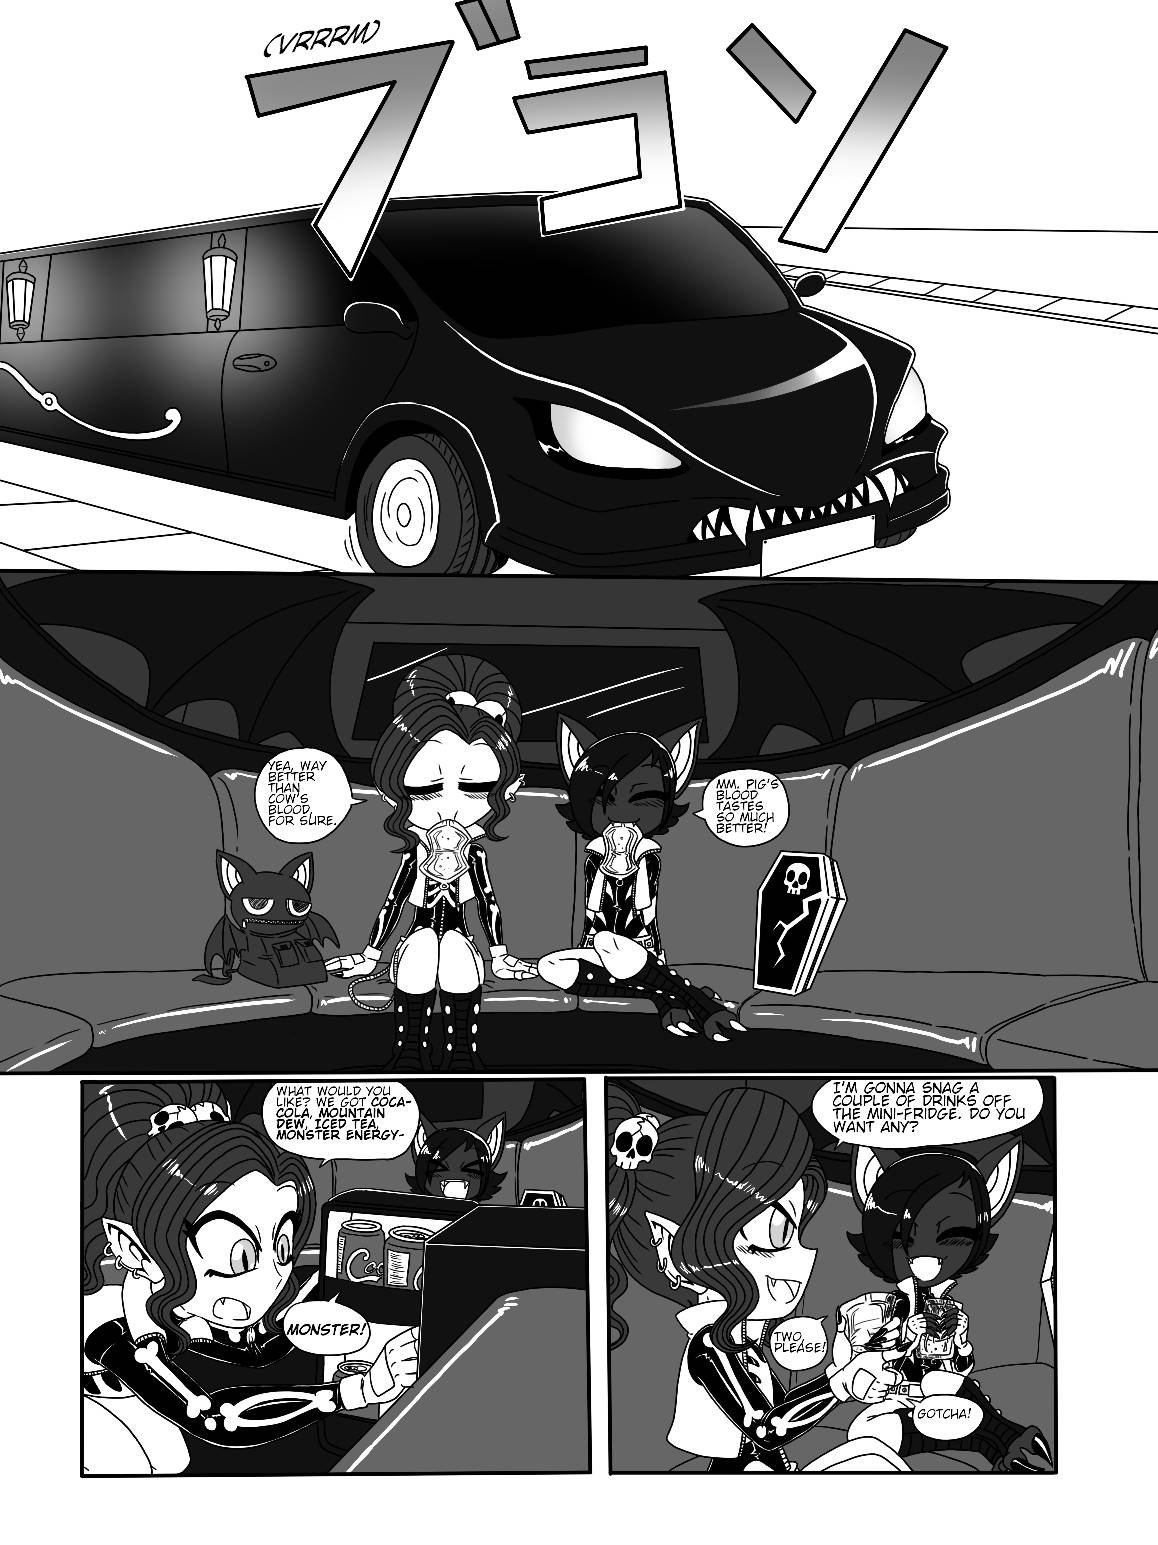 Back to School - Chapter 1 - Page 4 by PlayboyVampire on DeviantArt